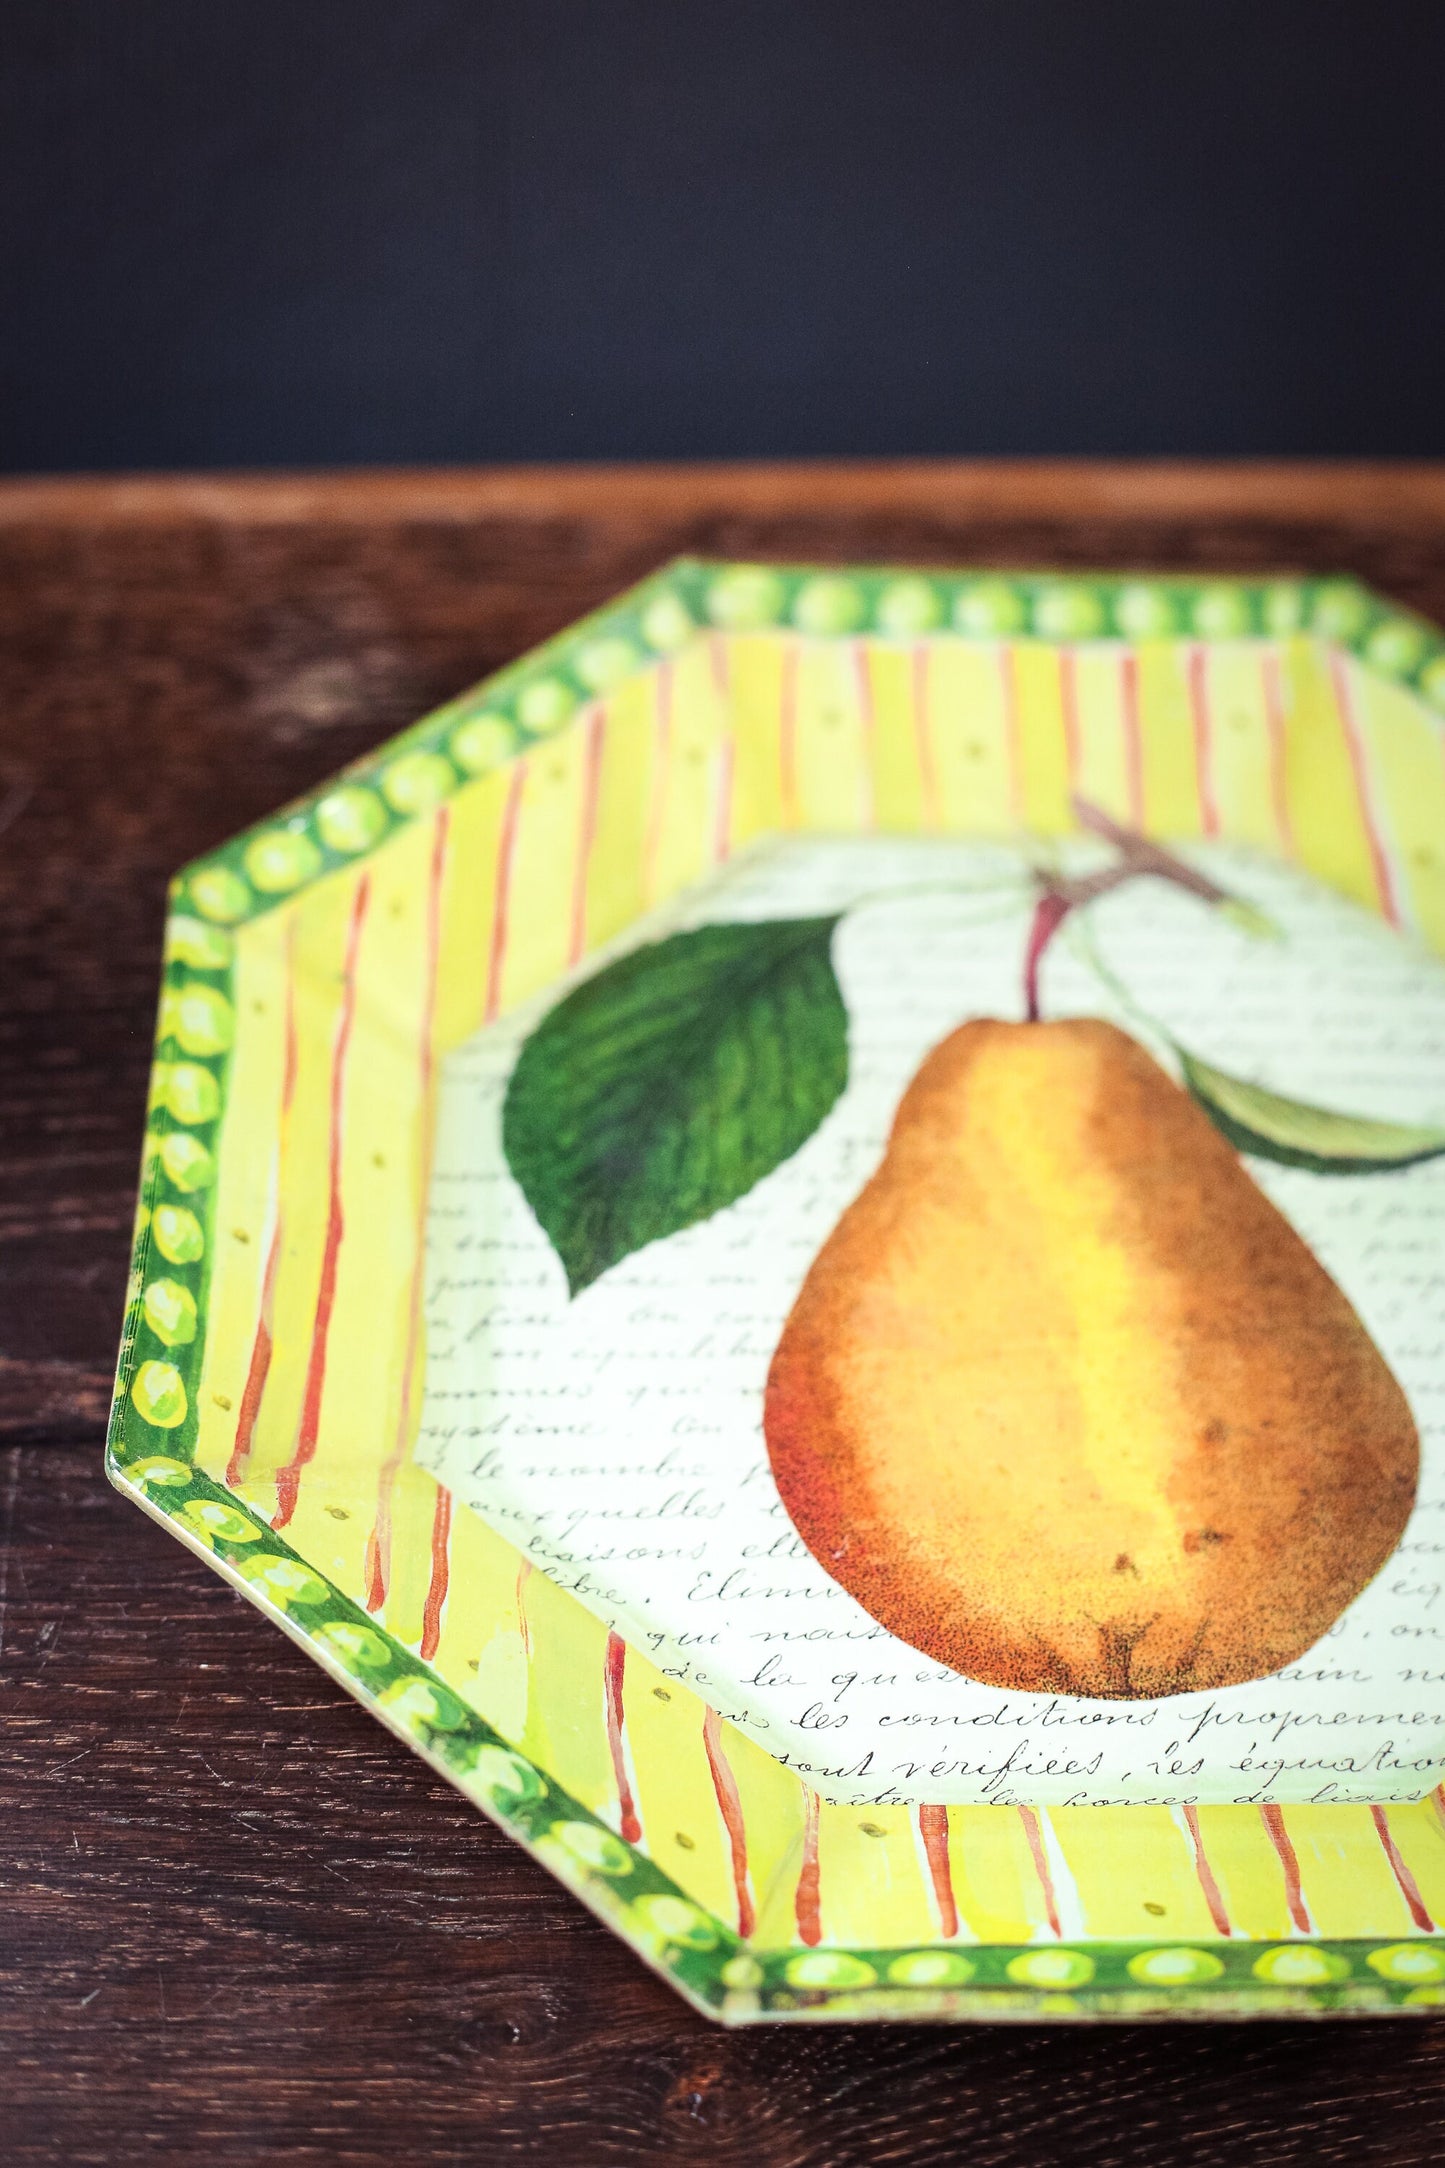 Green & Yellow Pear Octagon Plate - Vintage Reverse Painted Decoupage Plate